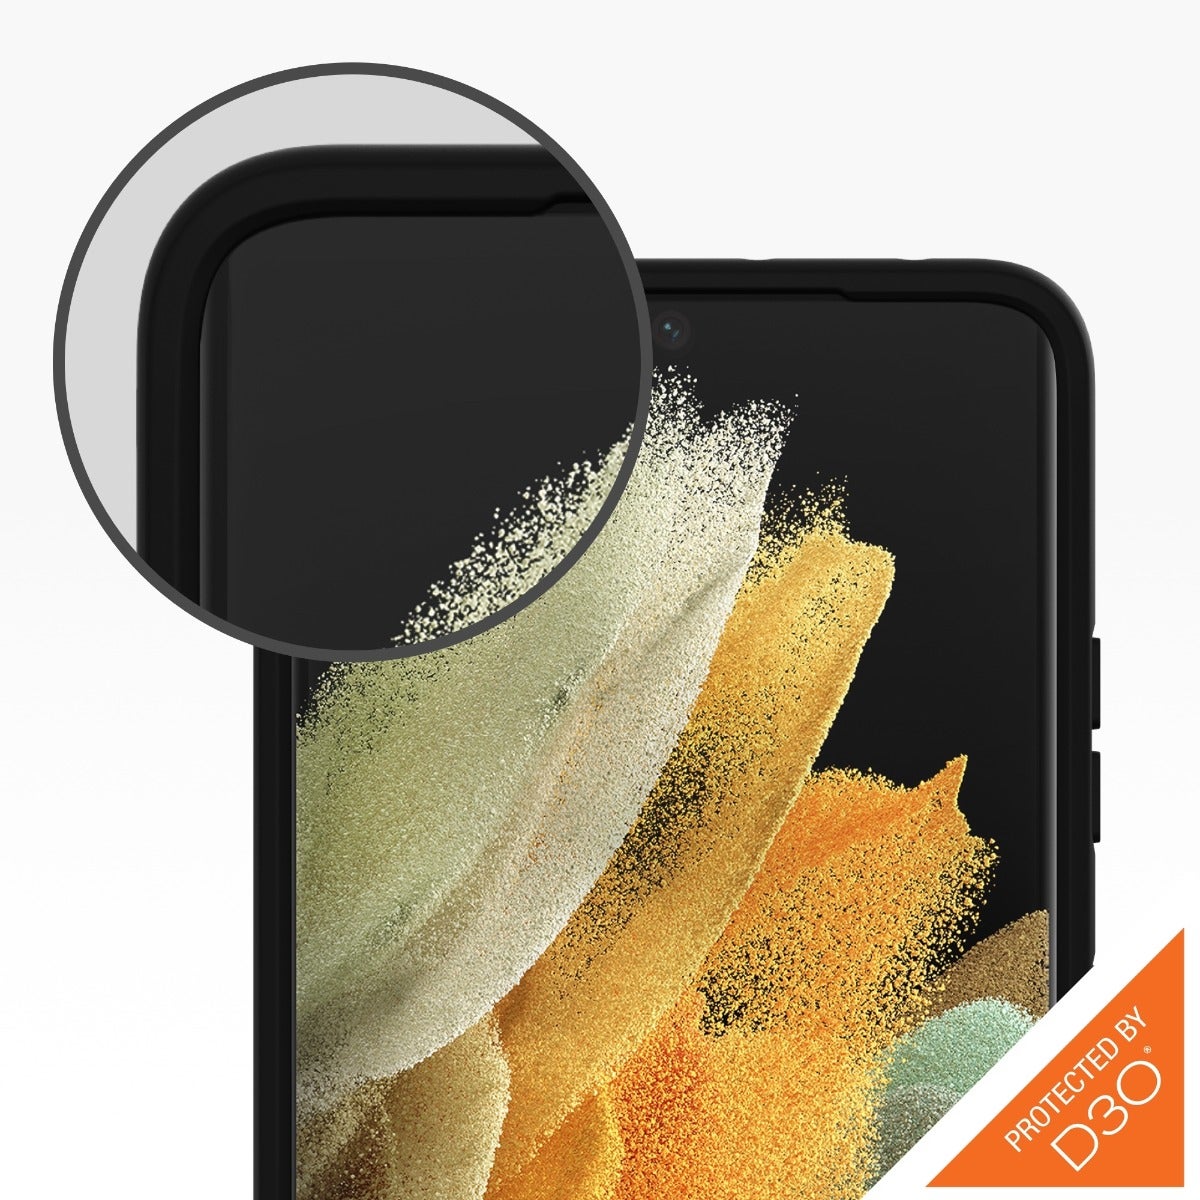 Edge-to-Edge Protection||Gear4 cases wrap to the front of the phone to provide edge-to-edge protection.